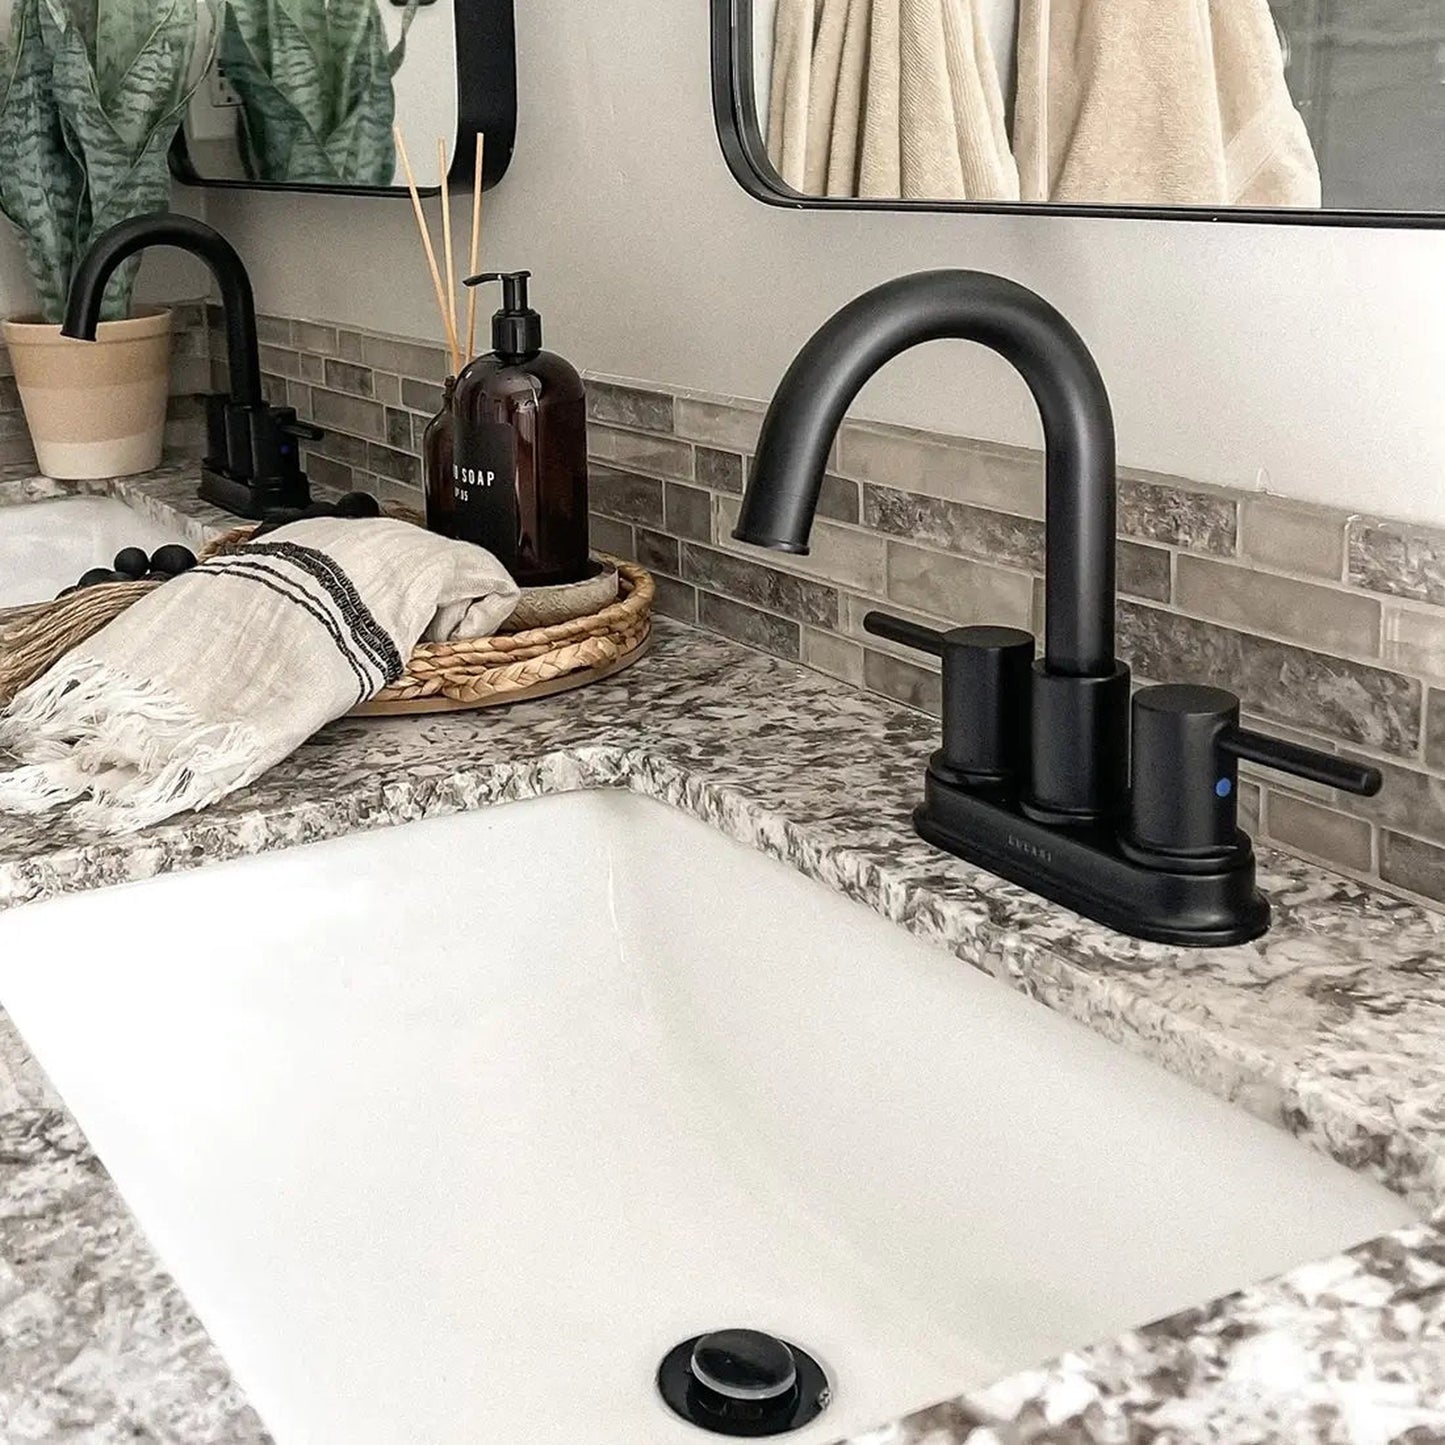 Lulani St. Lucia Matte Black 1.2 GPM Two Handle Centerset Faucet With Drain Assembly